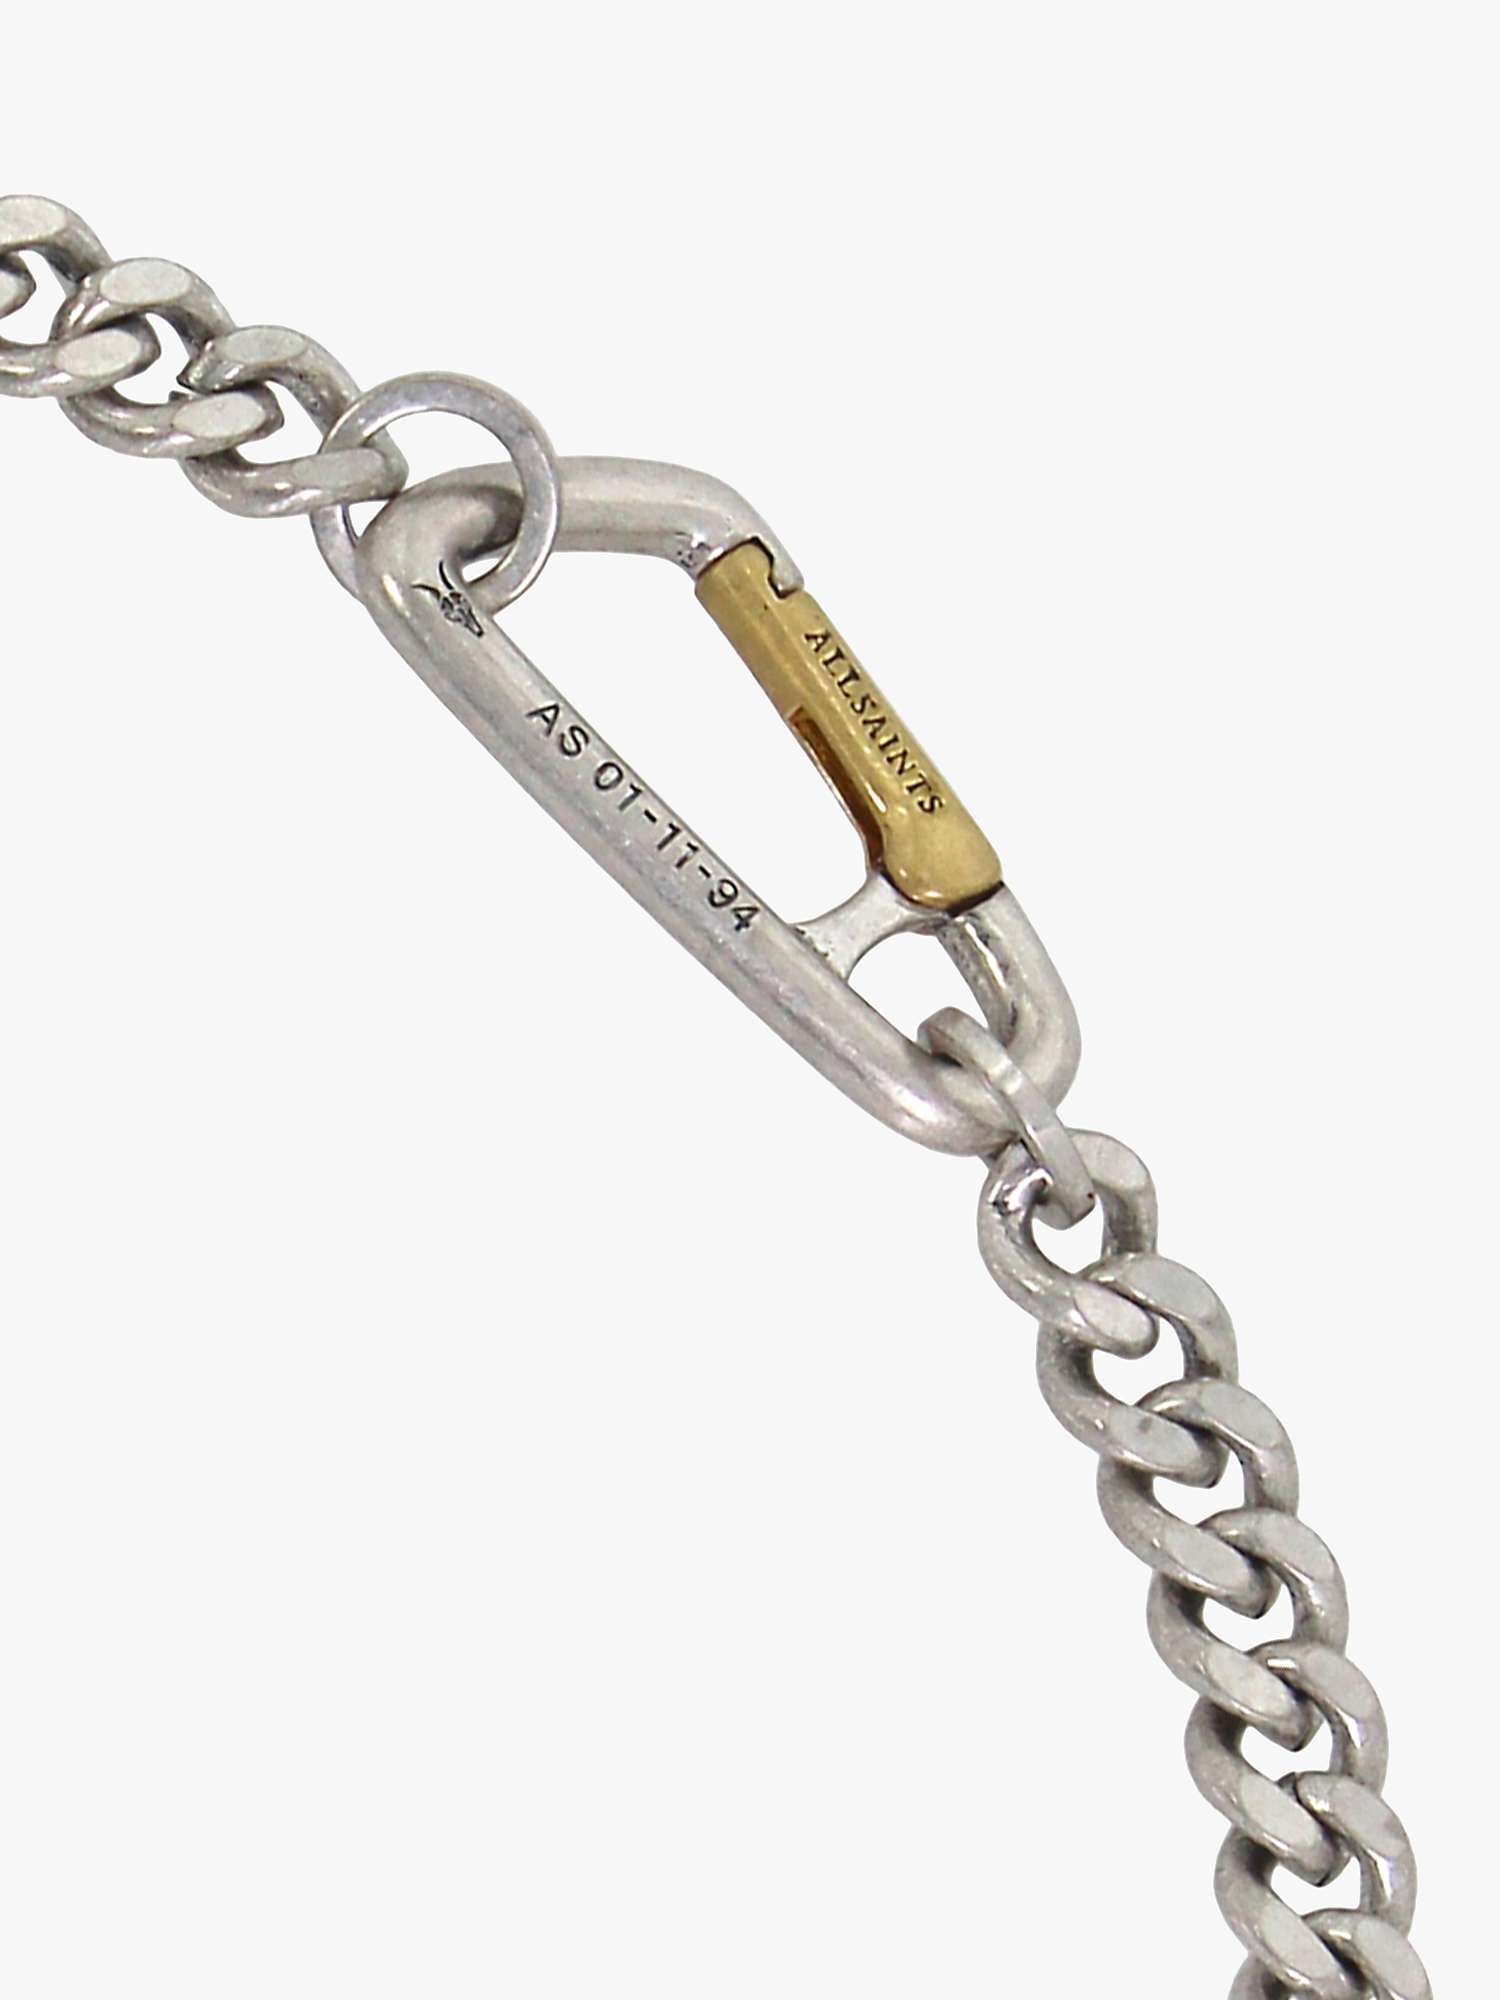 Buy AllSaints Unisex Carabiner Clasp Curb Chain Necklace, Warm Brass/Silver Online at johnlewis.com